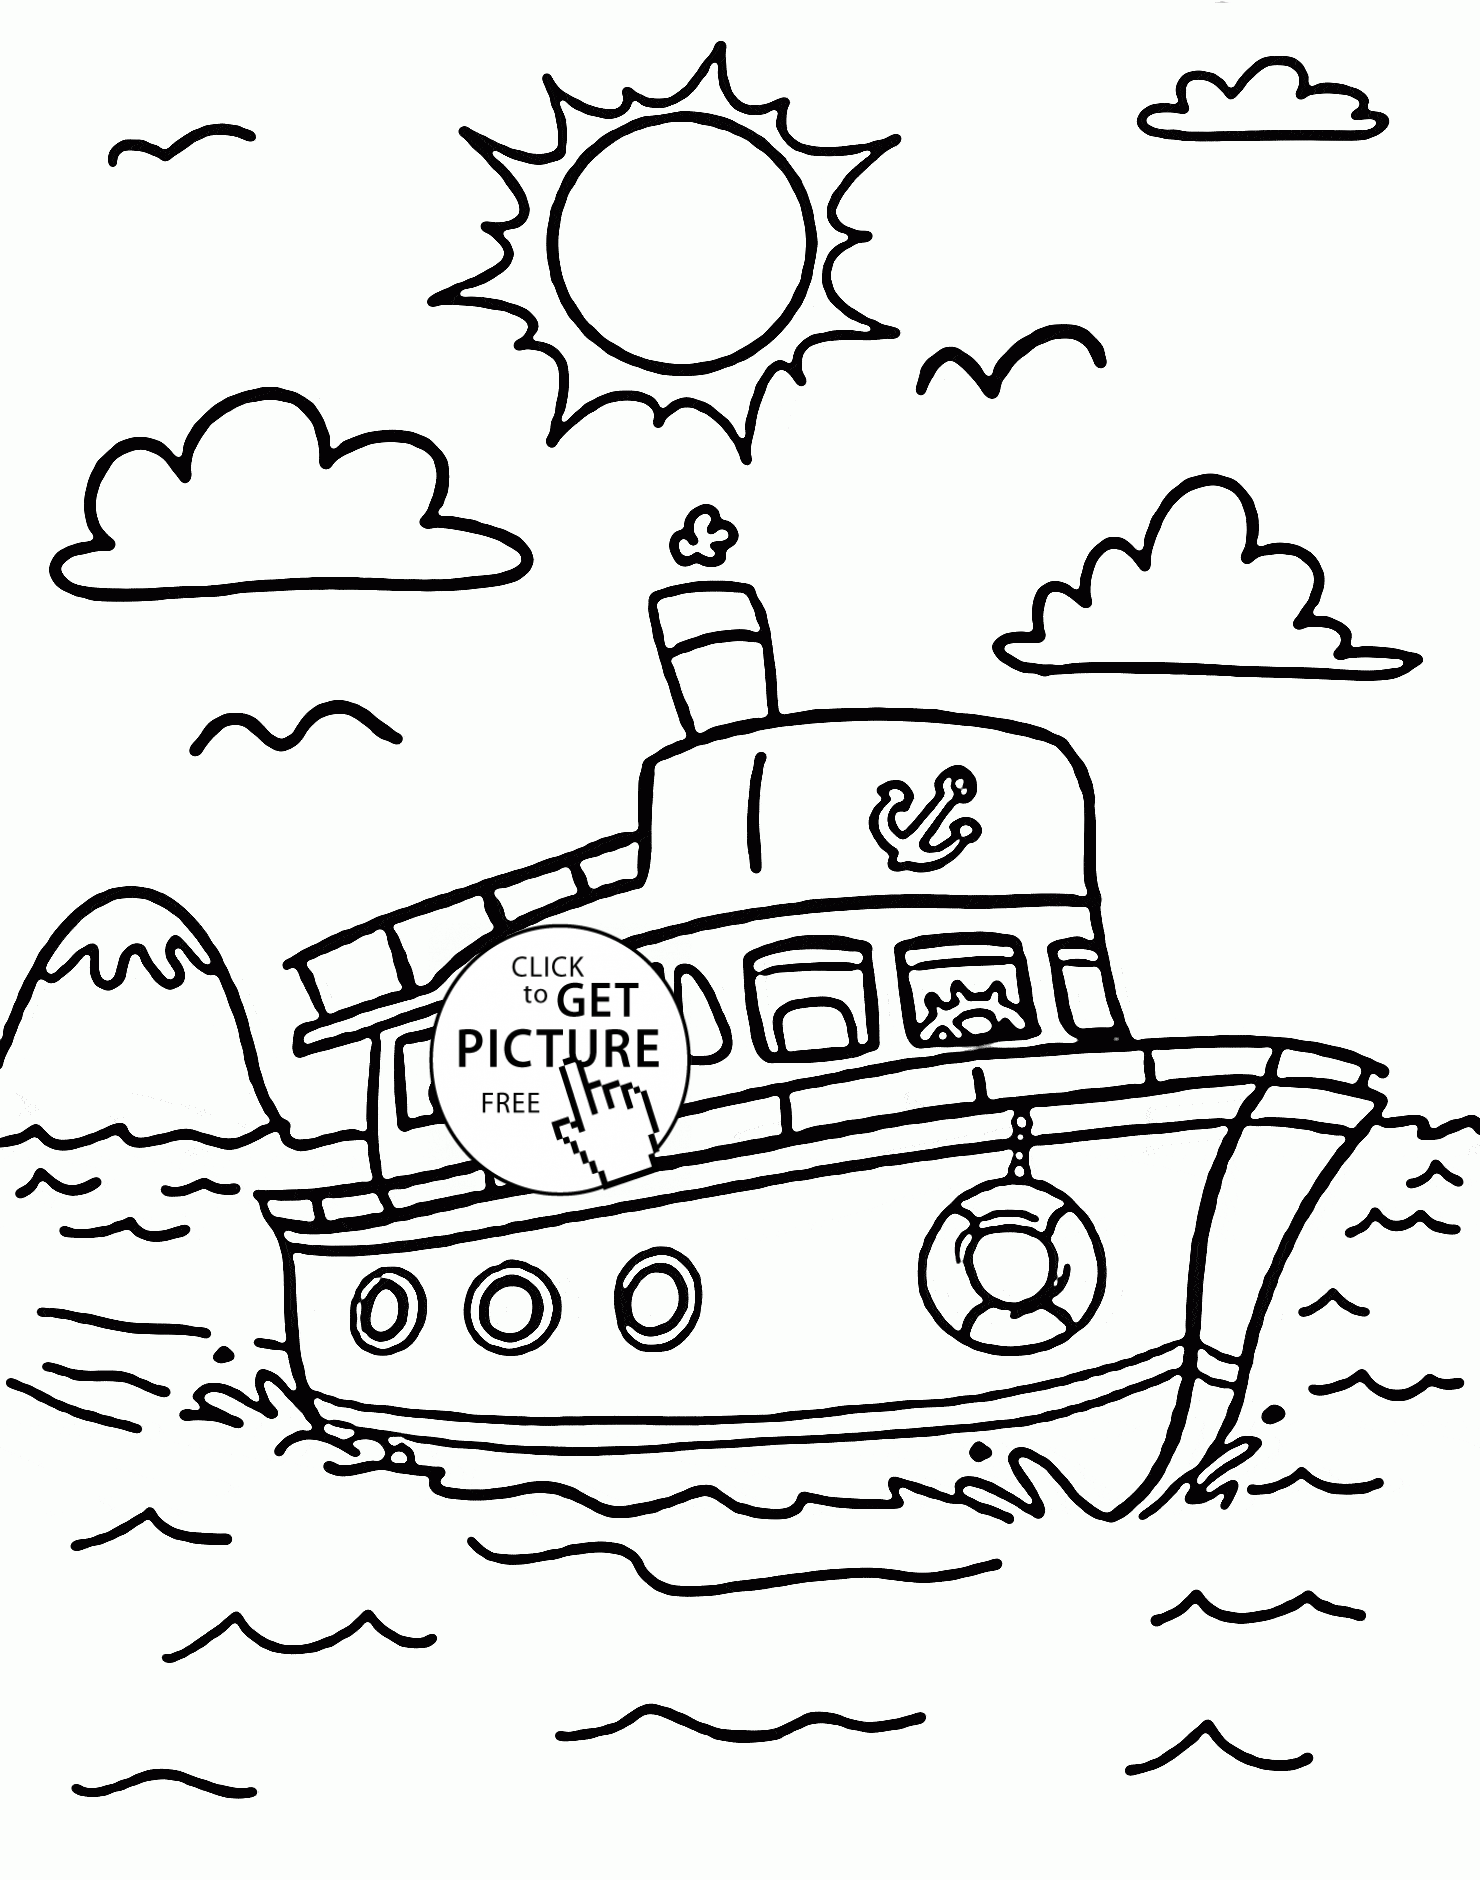 transportation coloring pages for kids nice ship coloring page for kids transportation coloring for pages coloring transportation kids 